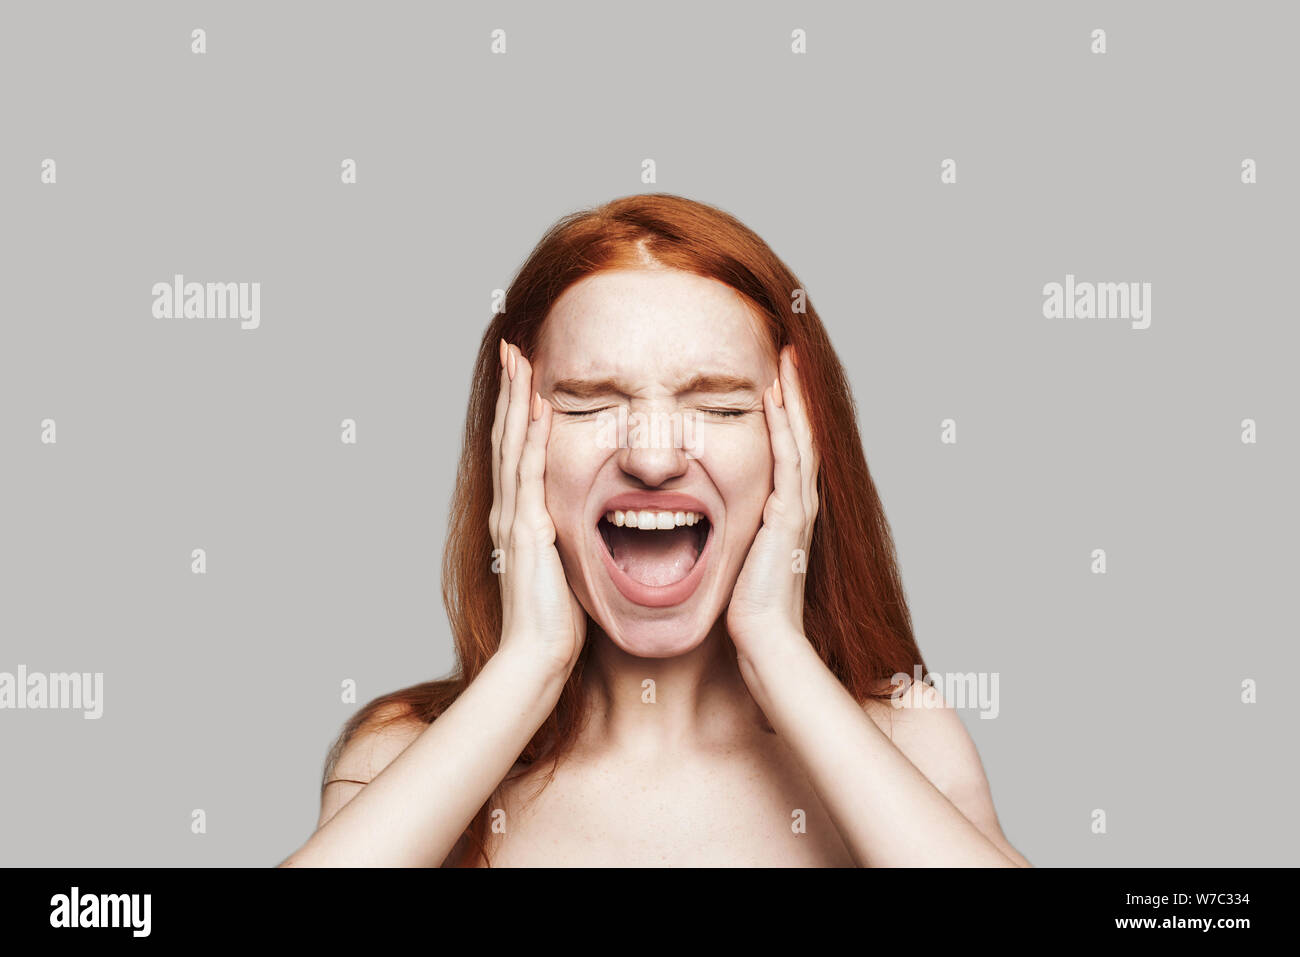 Angry stressed hysterical redhead woman with mad emotional face screaming and holding head in hands while standing against grey background. Human emotions Stock Photo